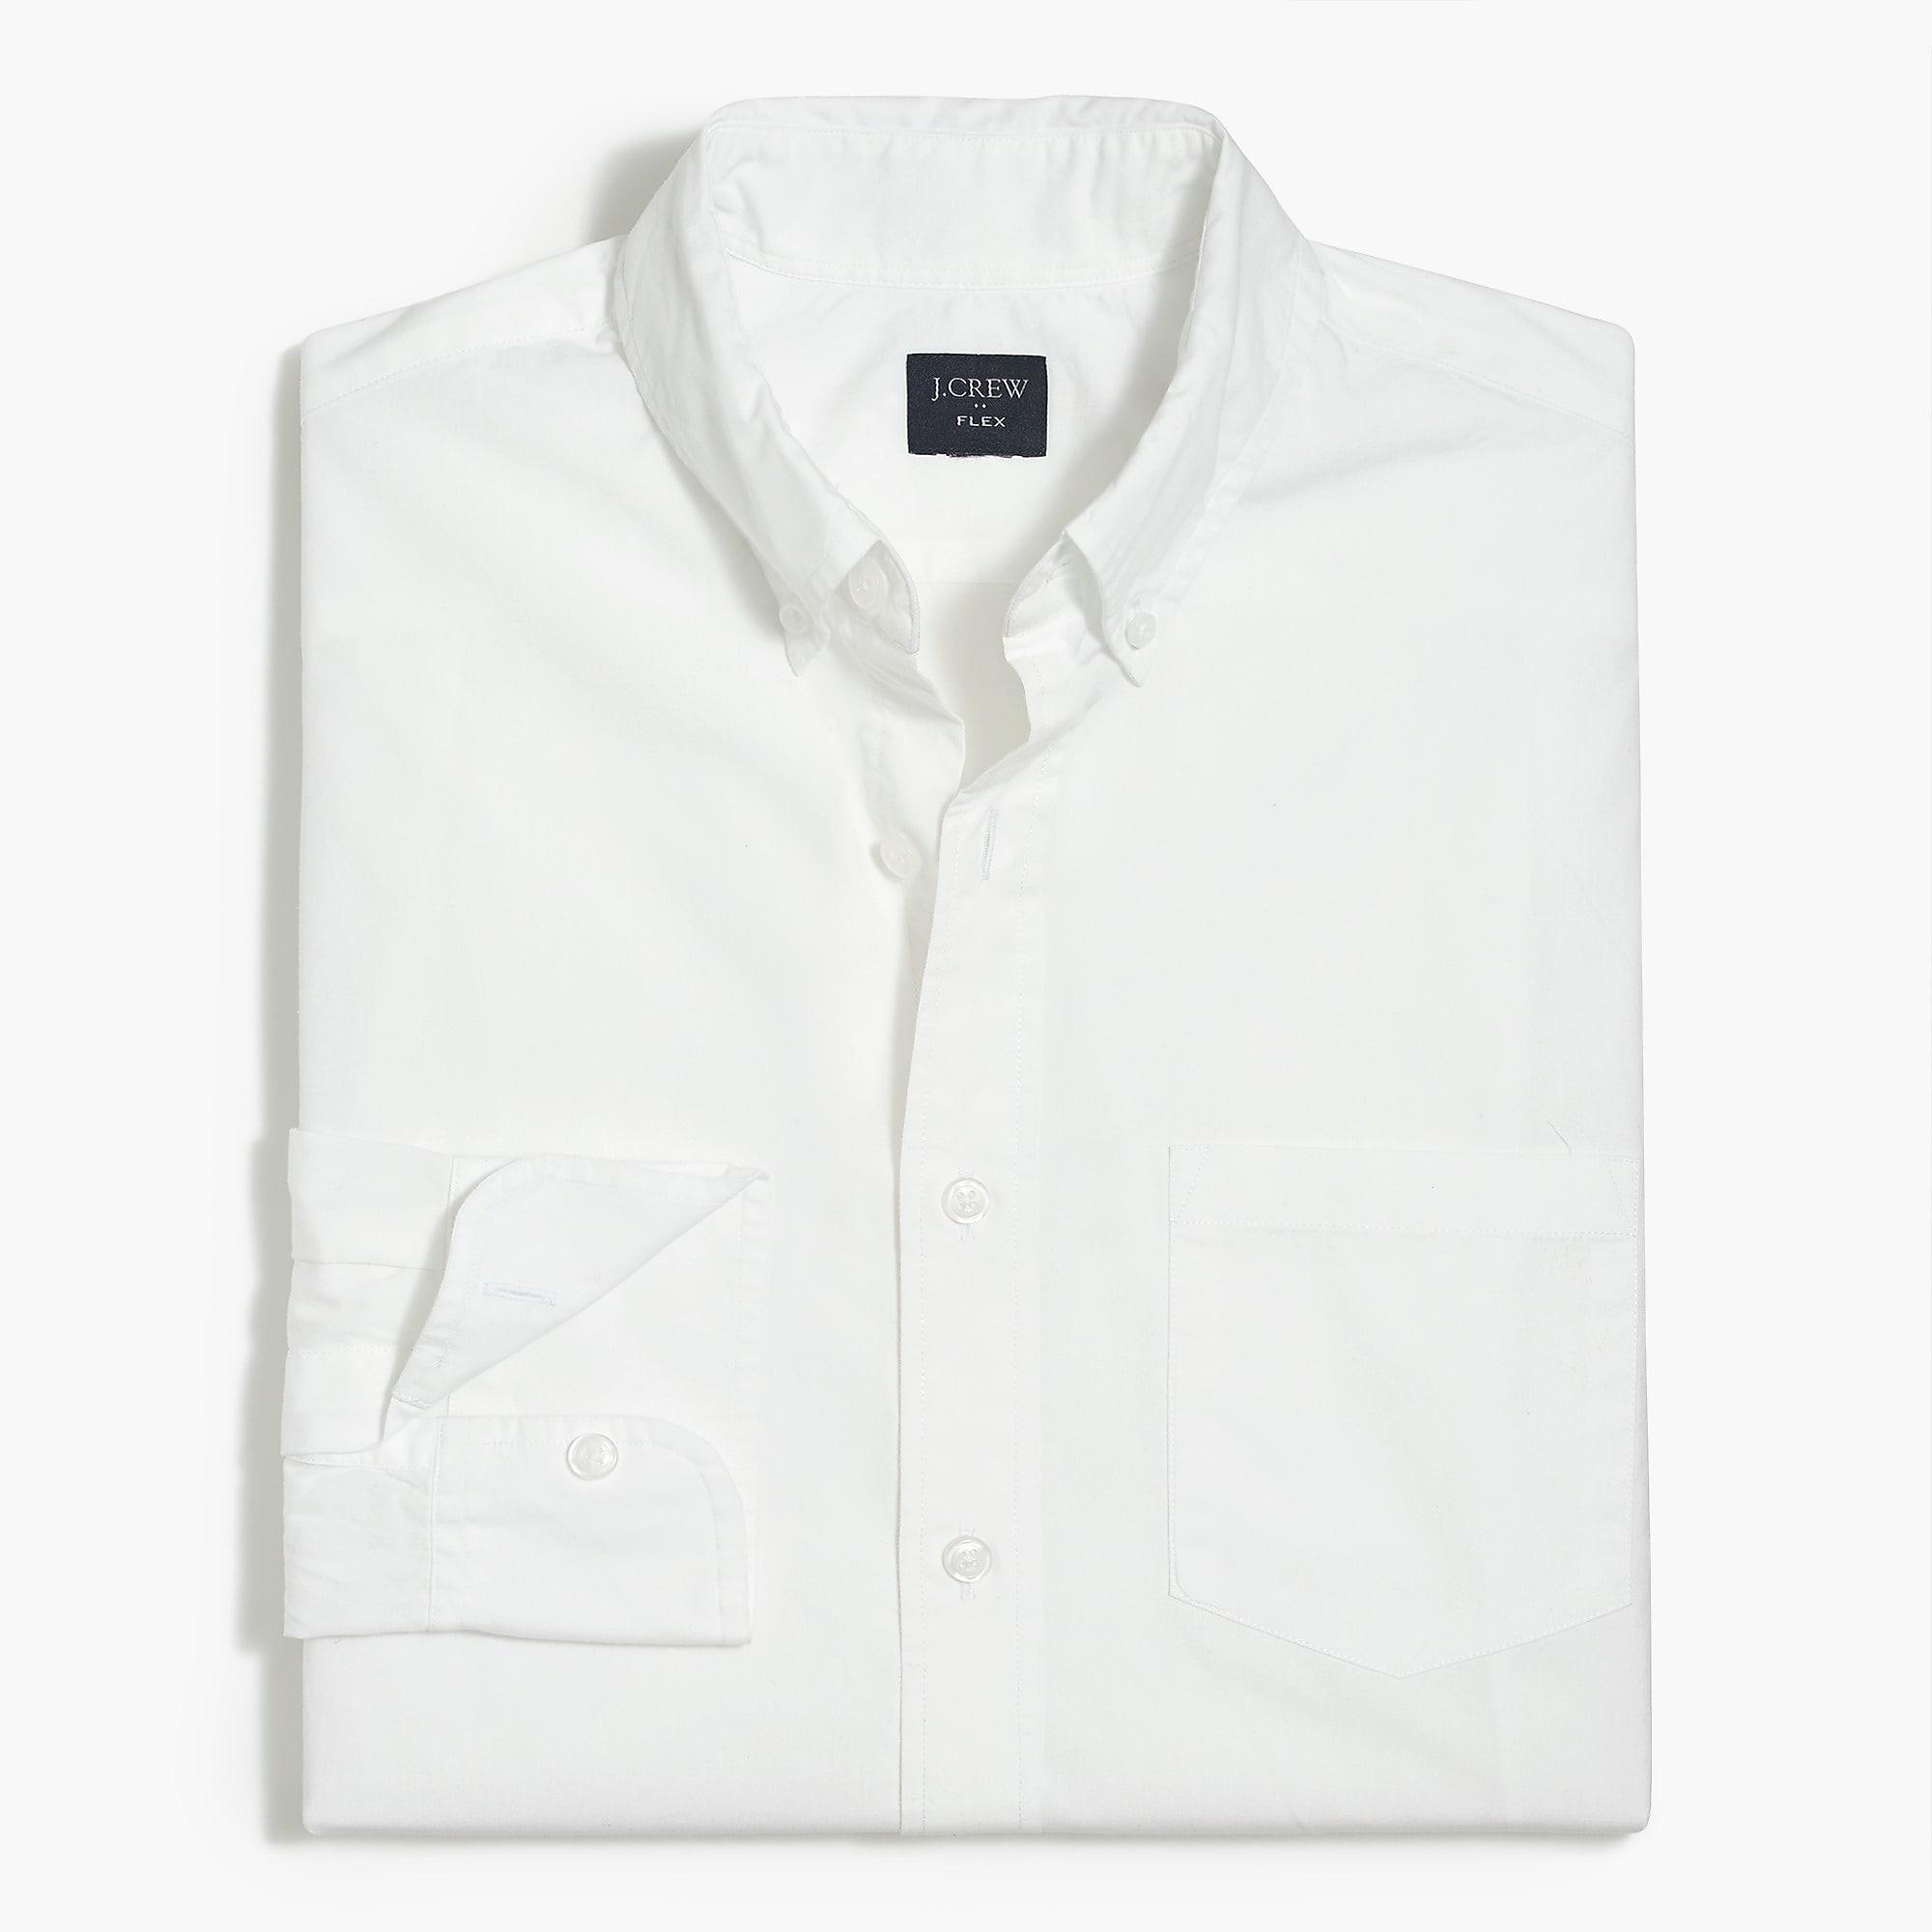 J.Crew Cotton Untucked Flex Casual Shirt in White for Men - Lyst